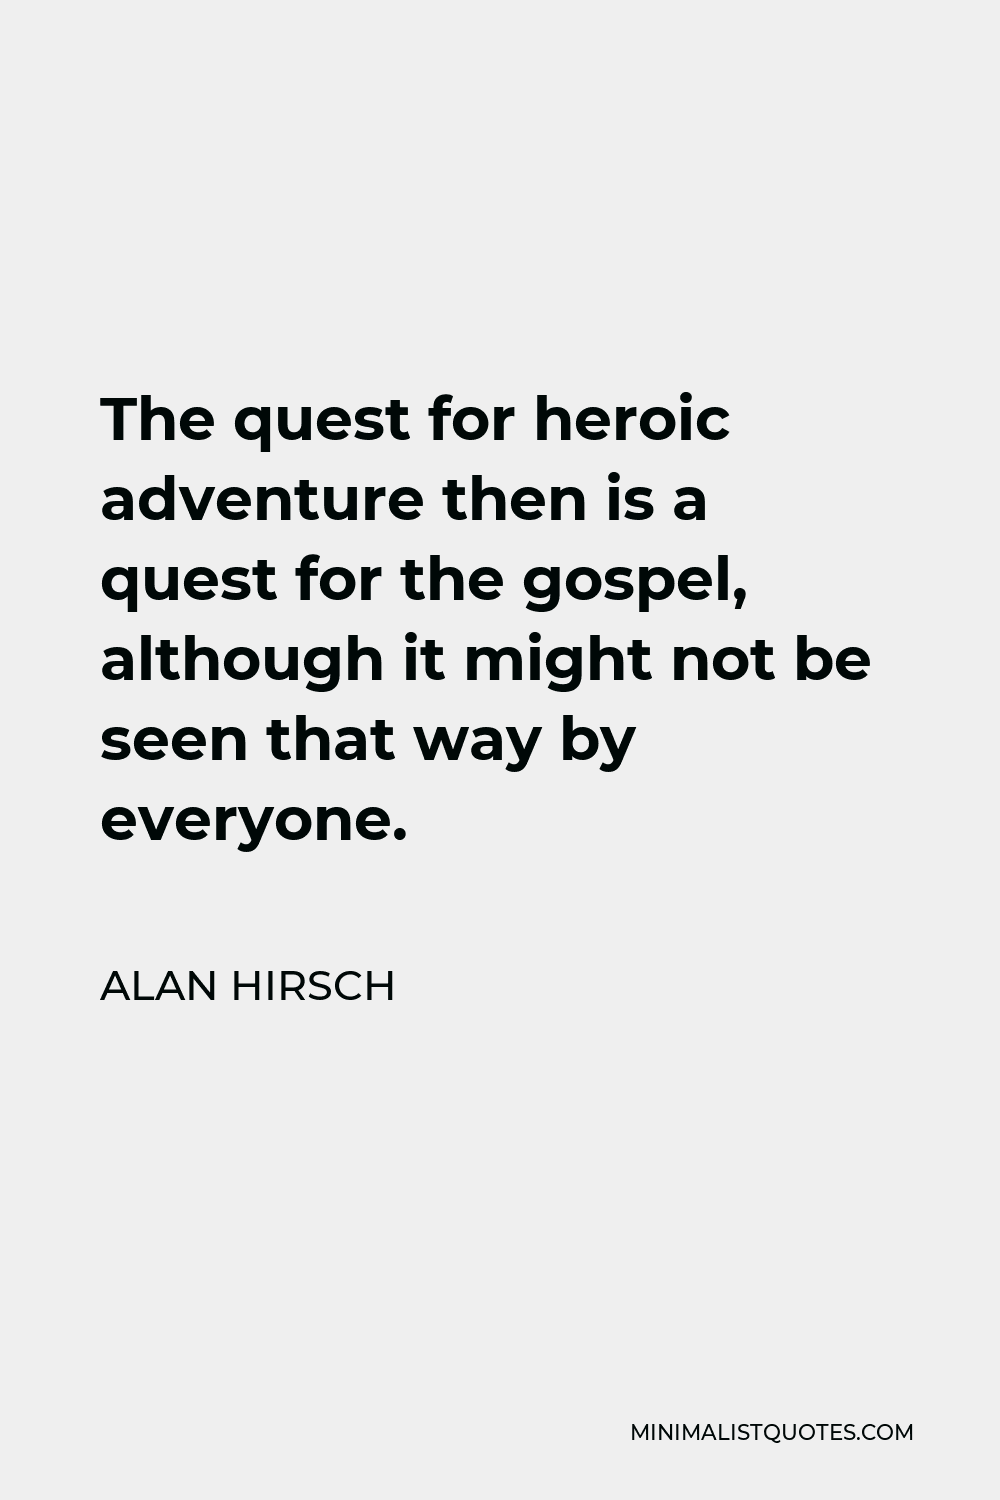 Alan Hirsch Quote - The quest for heroic adventure then is a quest for the gospel, although it might not be seen that way by everyone.